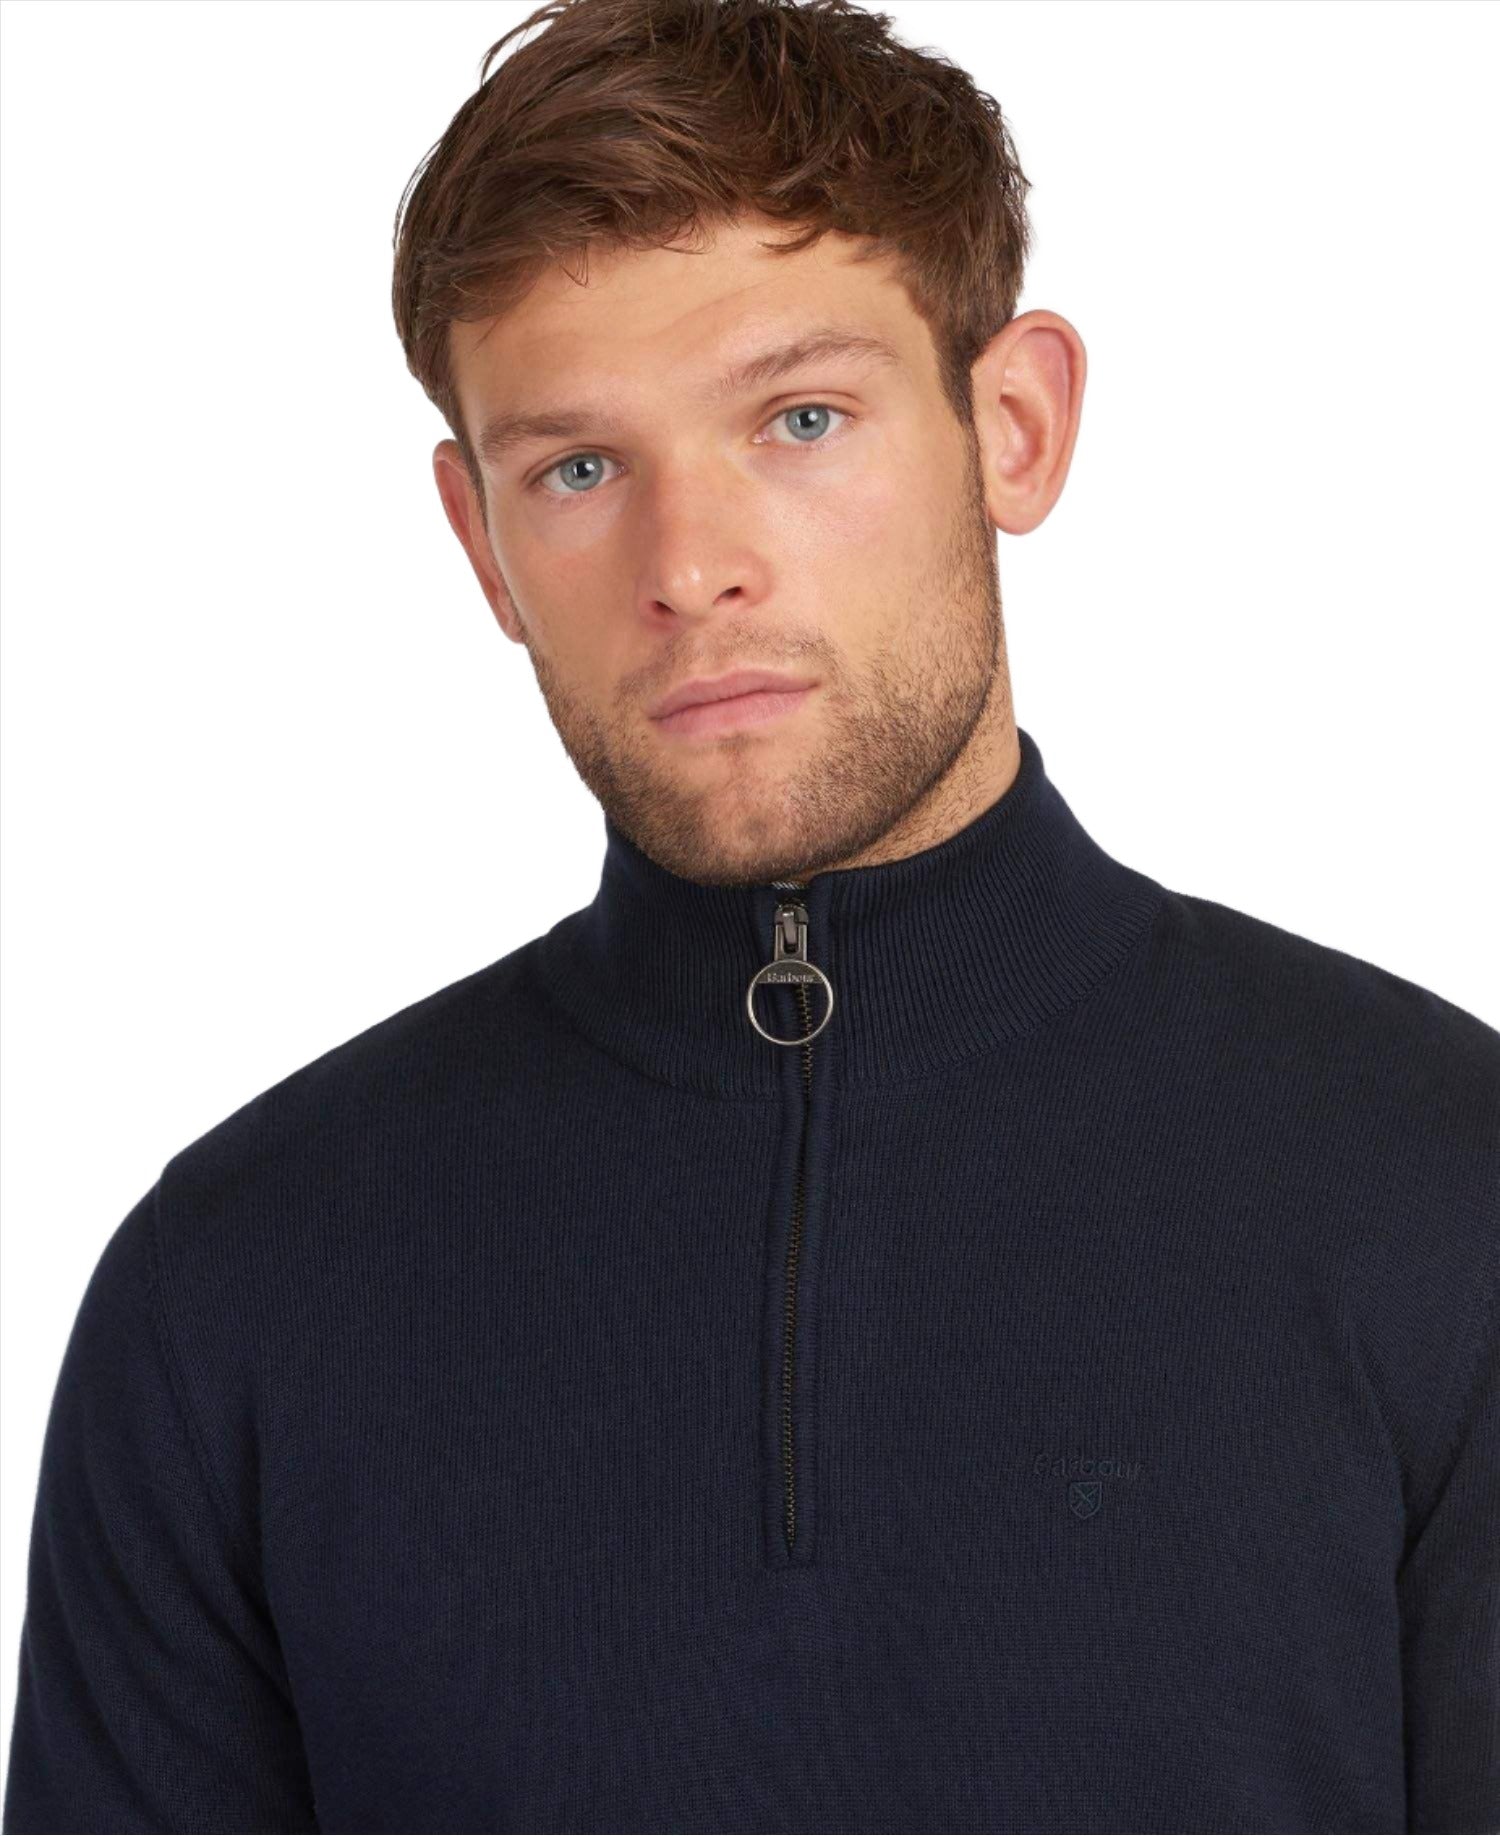 Barbour Cotton Half Zip - The Luxury Promotional Gifts Company Limited